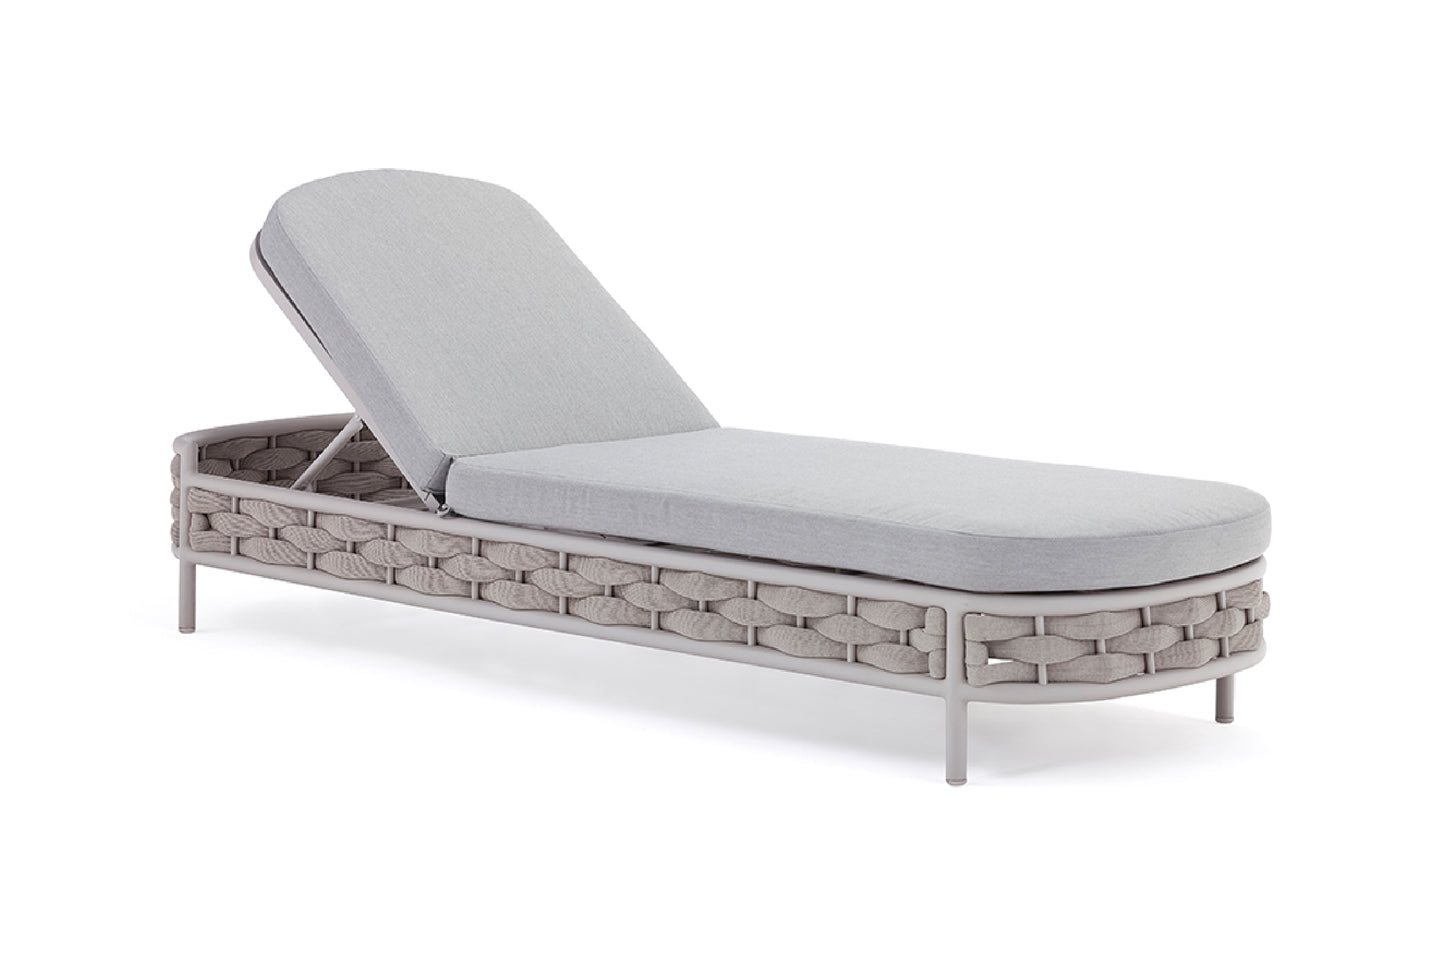 Loop Outdoor Chaise Lounge